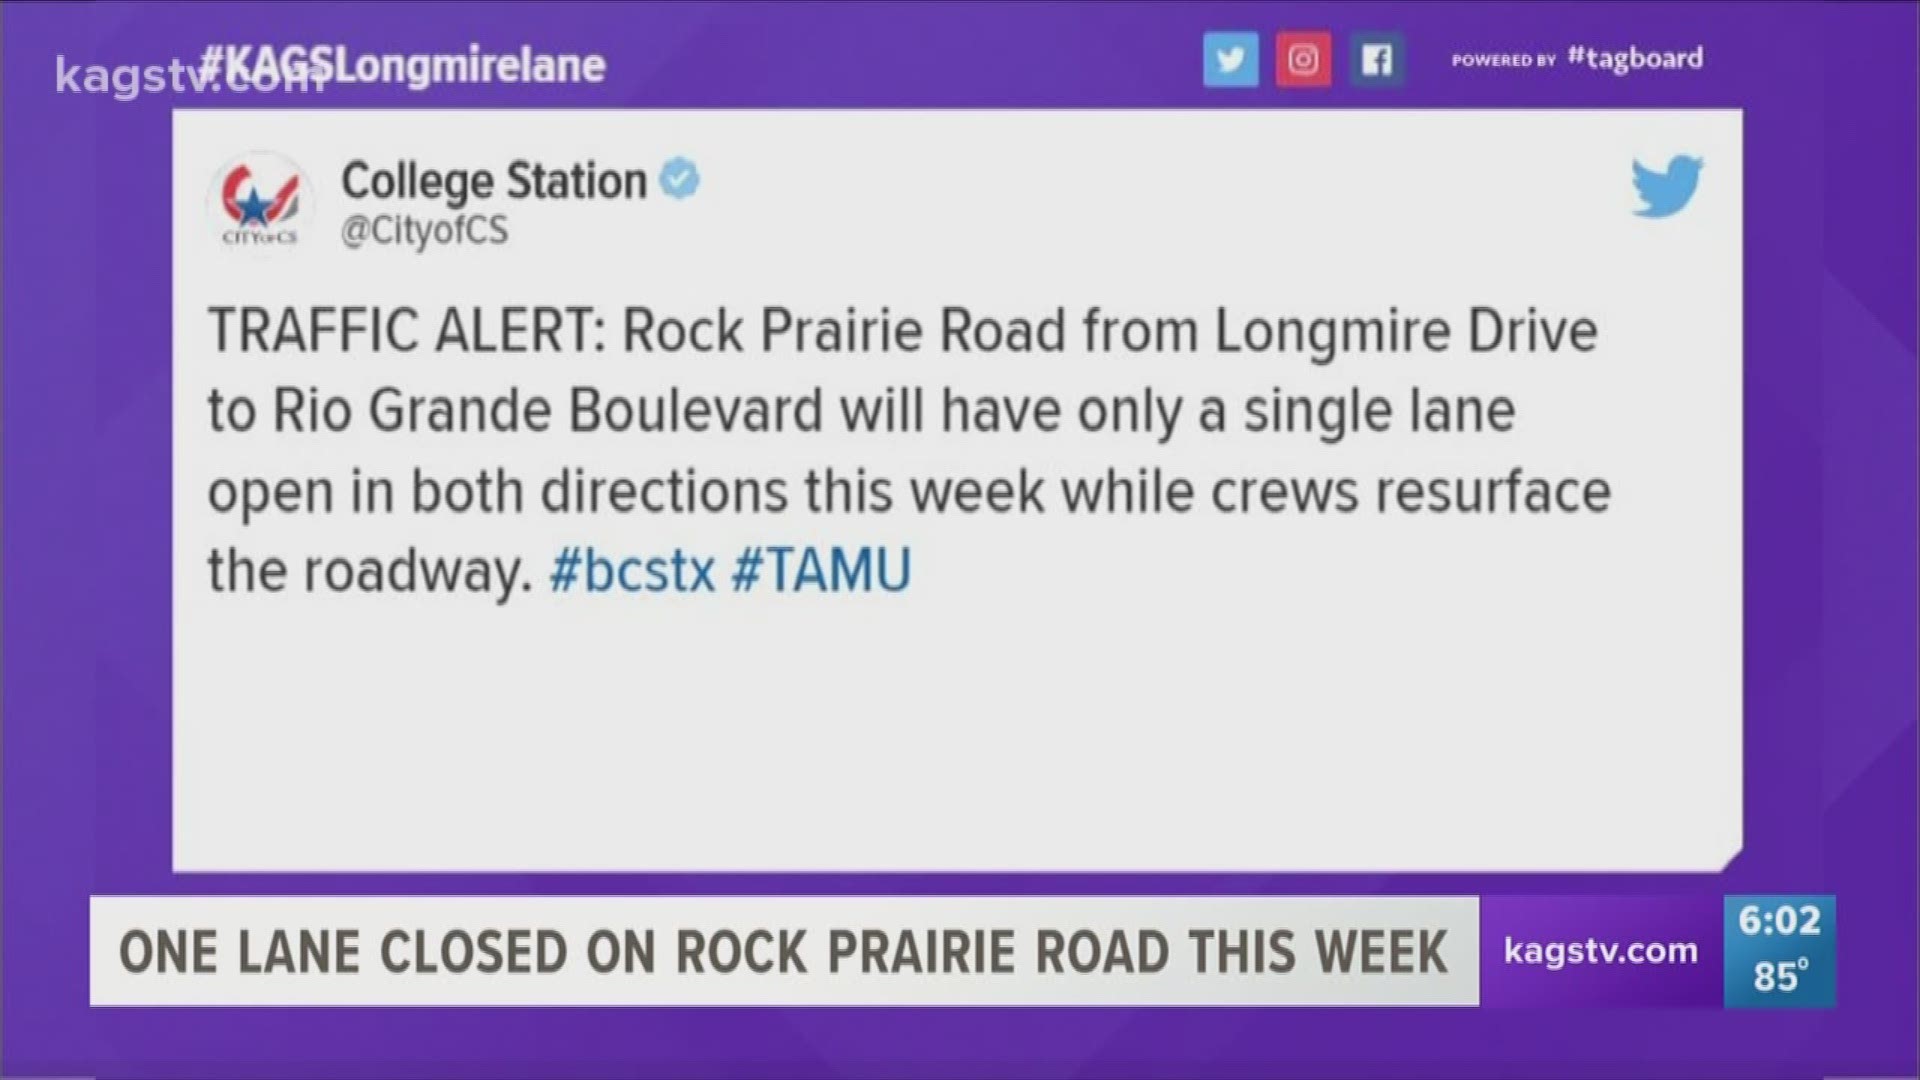 Crews will be working to resurface the roadway in each direction on Rock Prairie Road from Longmire Road to Rio Grande Boulevard.